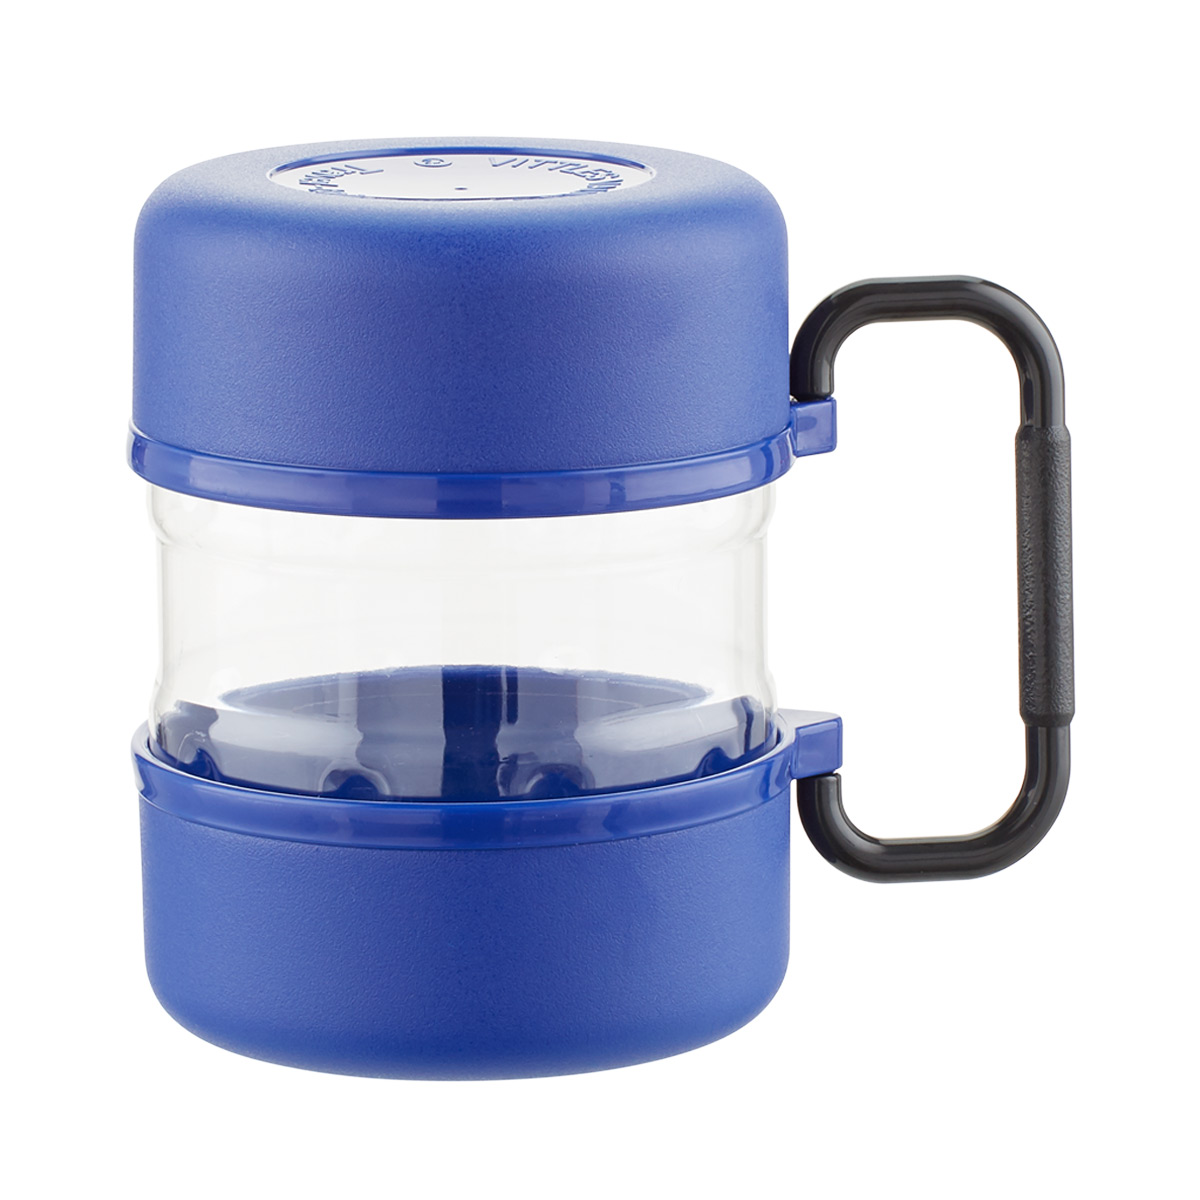 https://www.containerstore.com/catalogimages/343692/10042014-pet-food-travel-tainer-v3.jpg